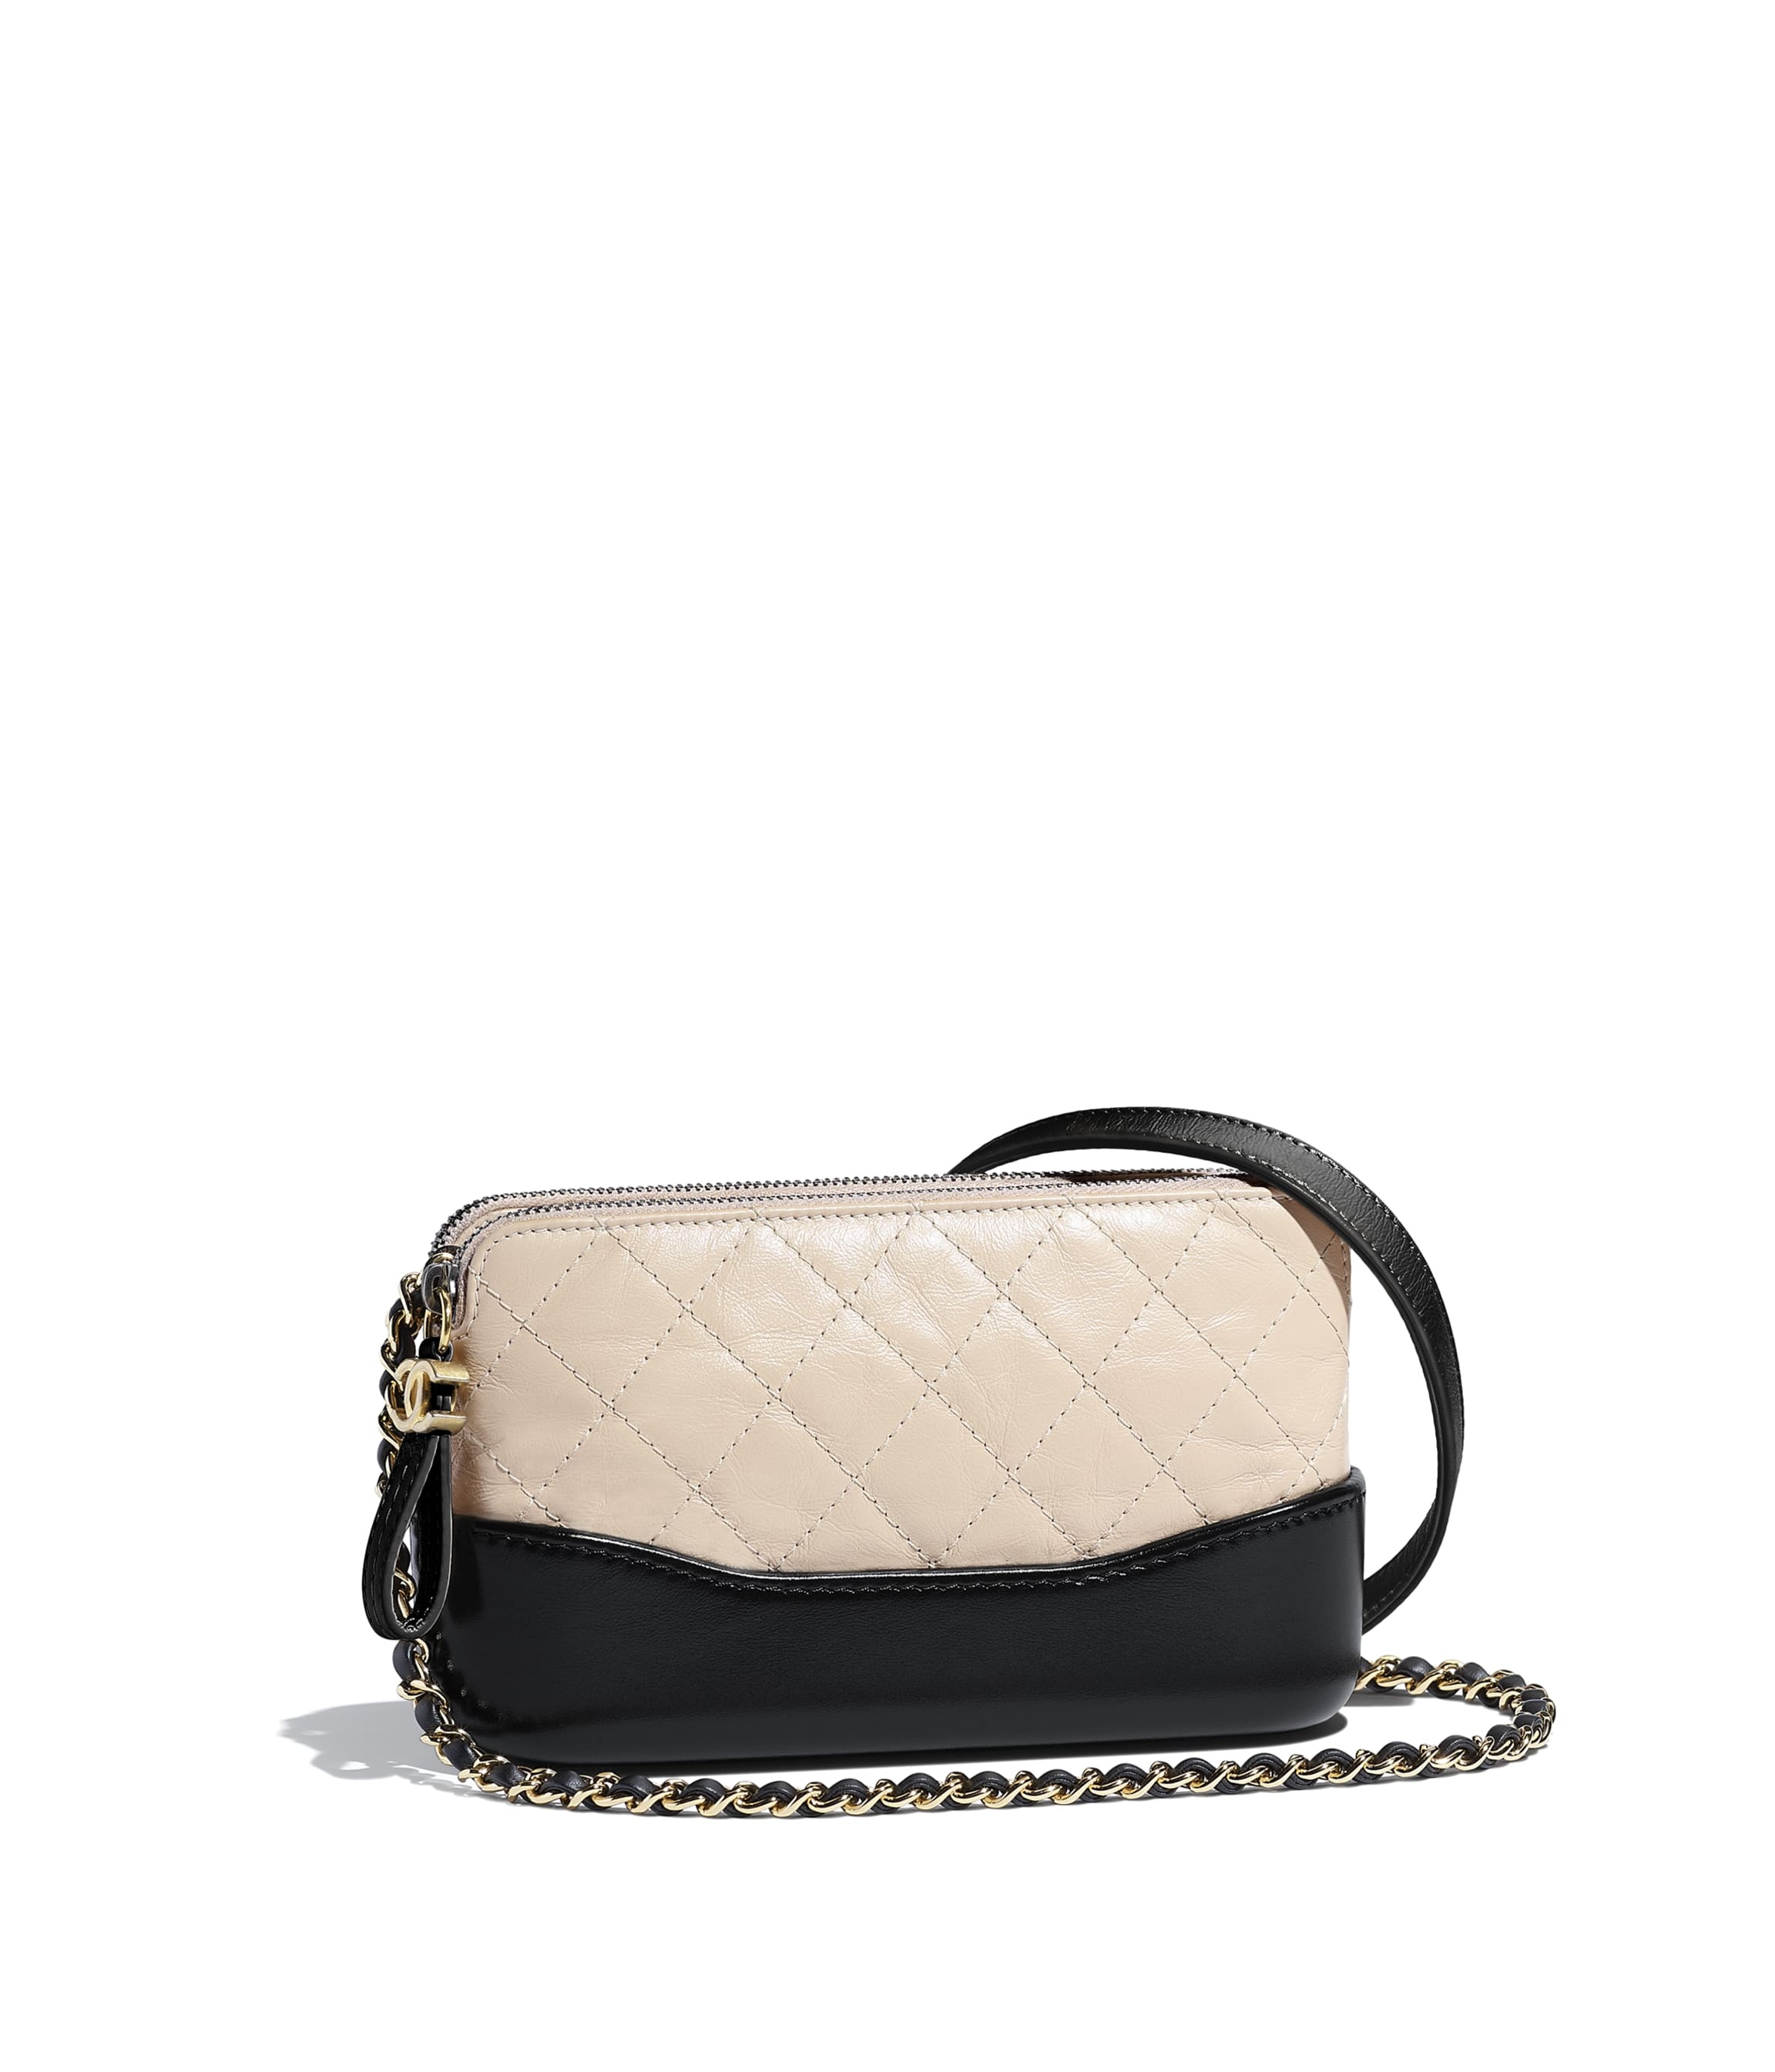 Clutch with Chain - 3